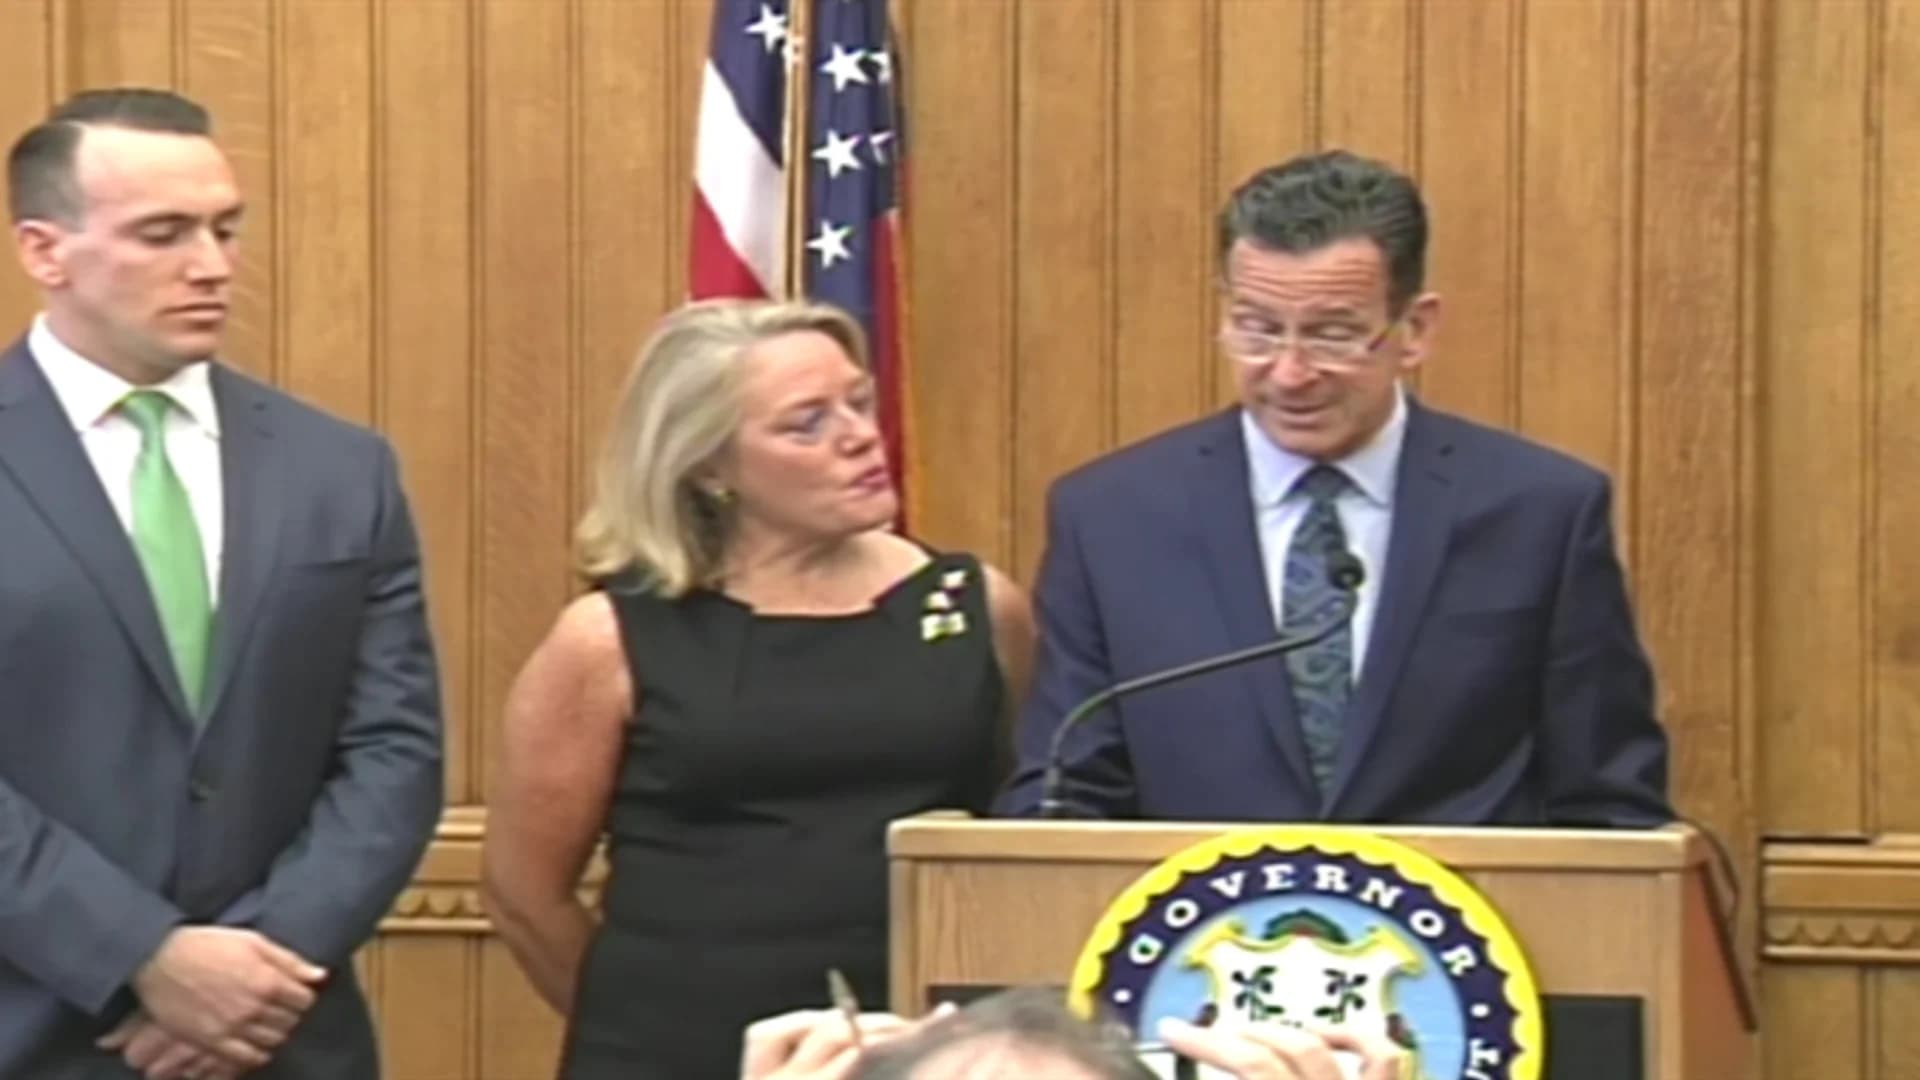 Experts speculate on who will succeed Gov. Malloy